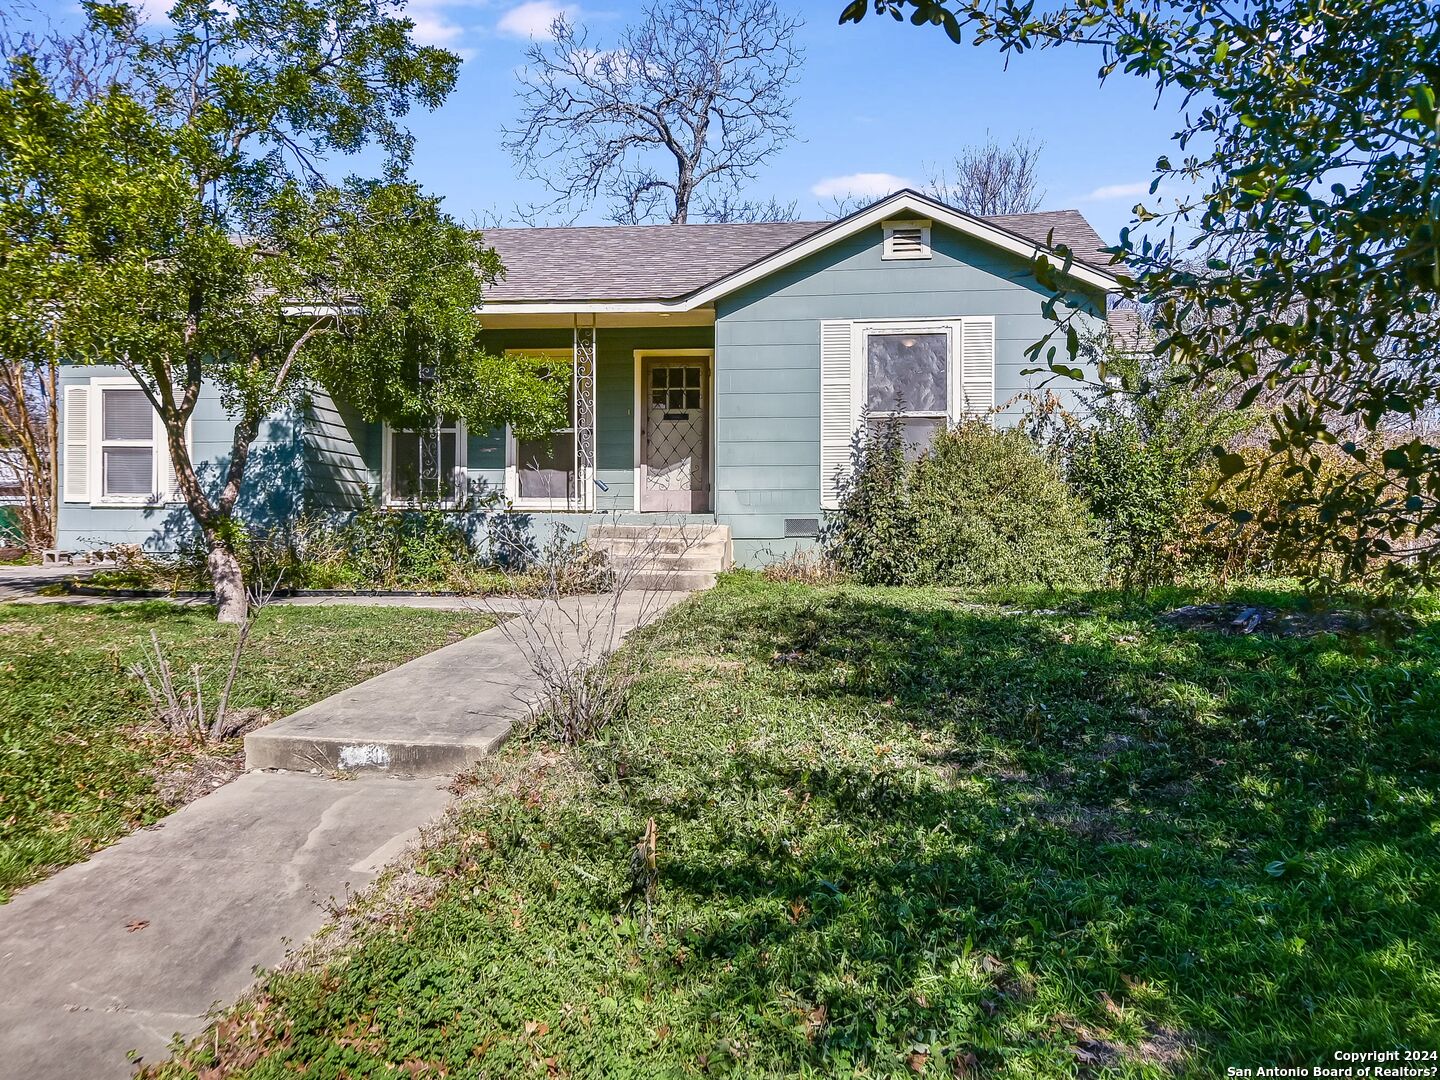 Photo of 149 Chevy Chase Dr in San Antonio, TX